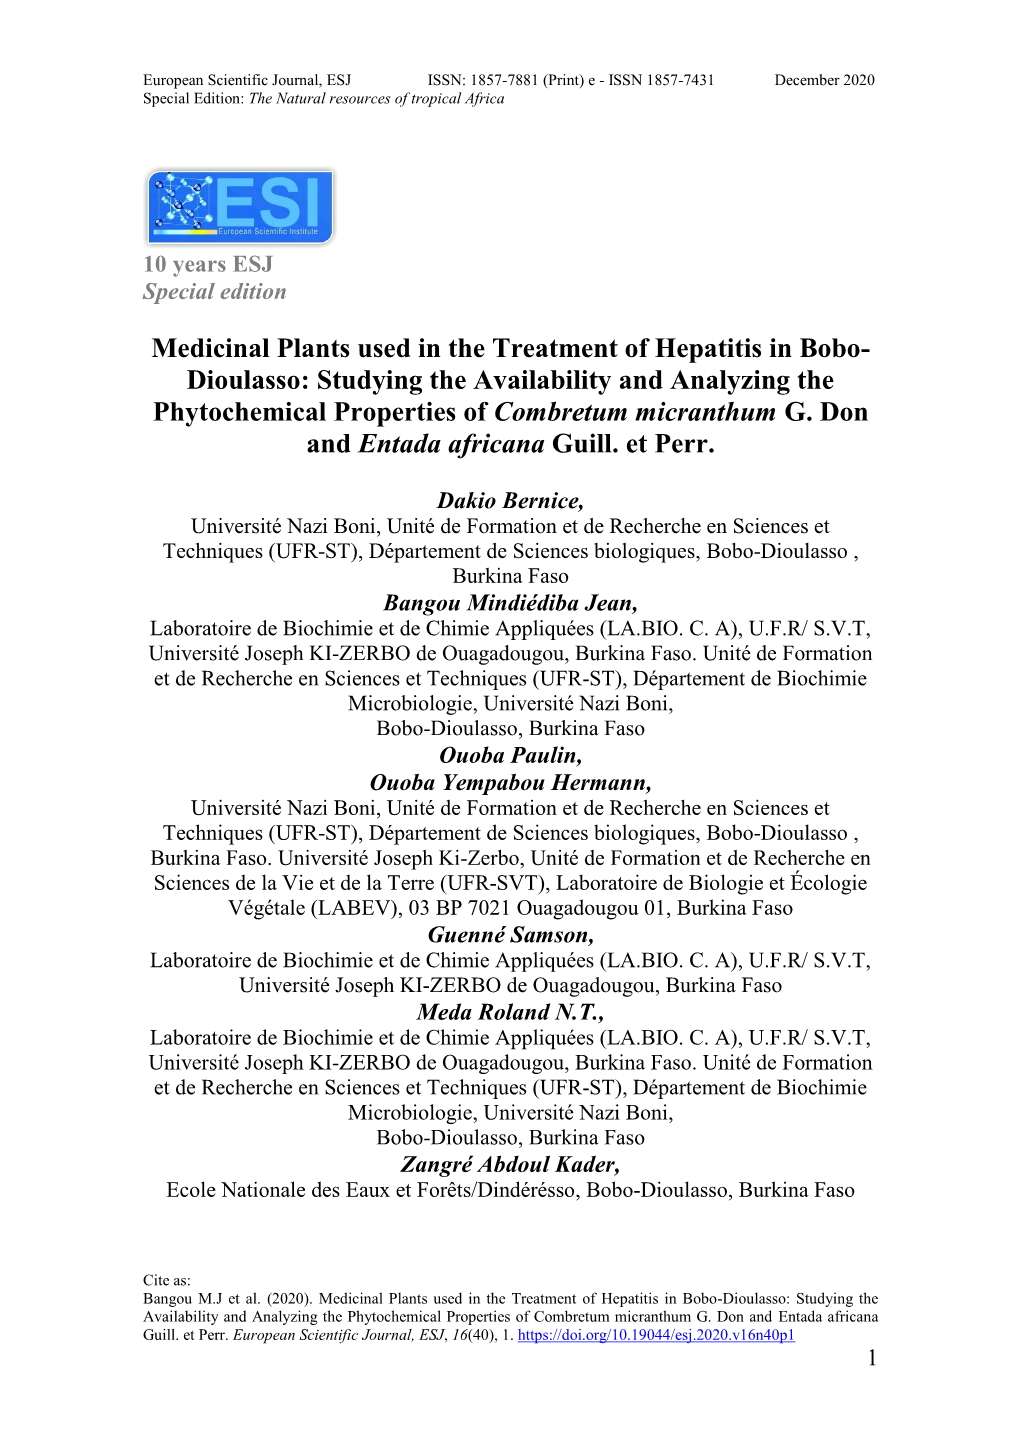 Medicinal Plants Used in the Treatment of Hepatitis in Bobo- Dioulasso: Studying the Availability and Analyzing the Phytochemical Properties of Combretum Micranthum G